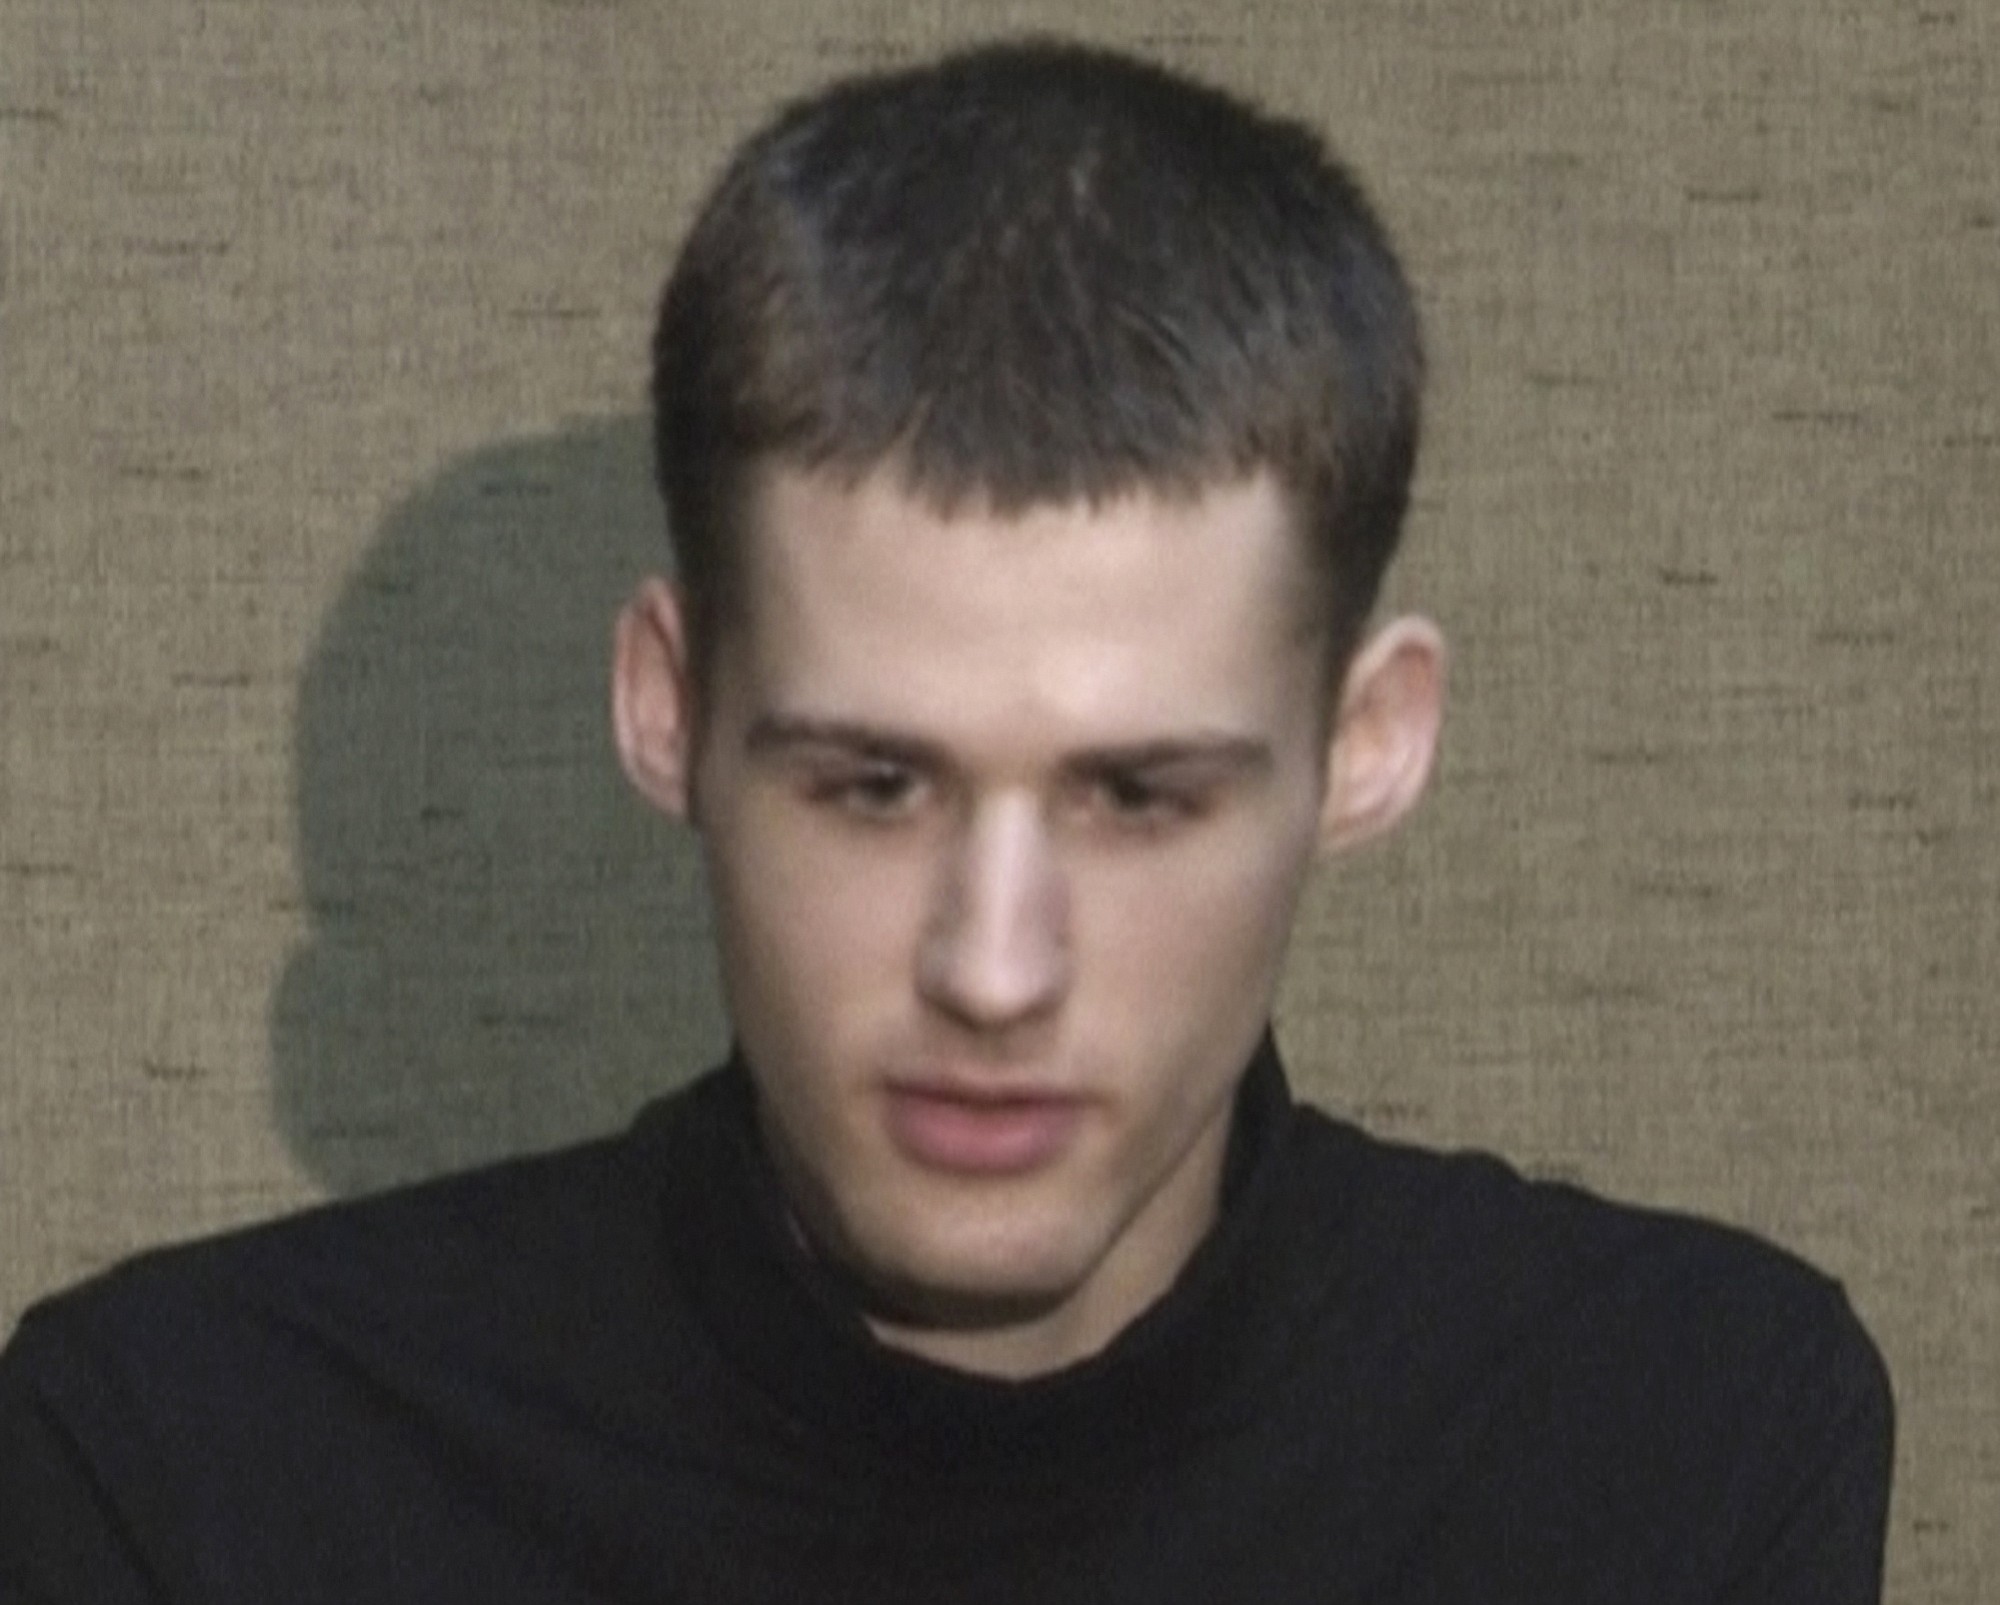 In this image taken from video, U.S. citizen Matthew Todd Miller speaks at an undisclosed location in North Korea Friday, Aug. 1, 2014. Two Americans, Miller and Jeffrey Edward Fowle, charged with ?anti-state? crimes in North Korea say in a video that they expect to be tried soon and possibly receive long prison terms, and appeal for help from the U.S. government. They made the comments in the video shot by a local AP Television News crew. The crew was taken to a location to meet the detained Americans after repeated requests to North Korean authorities to see them.